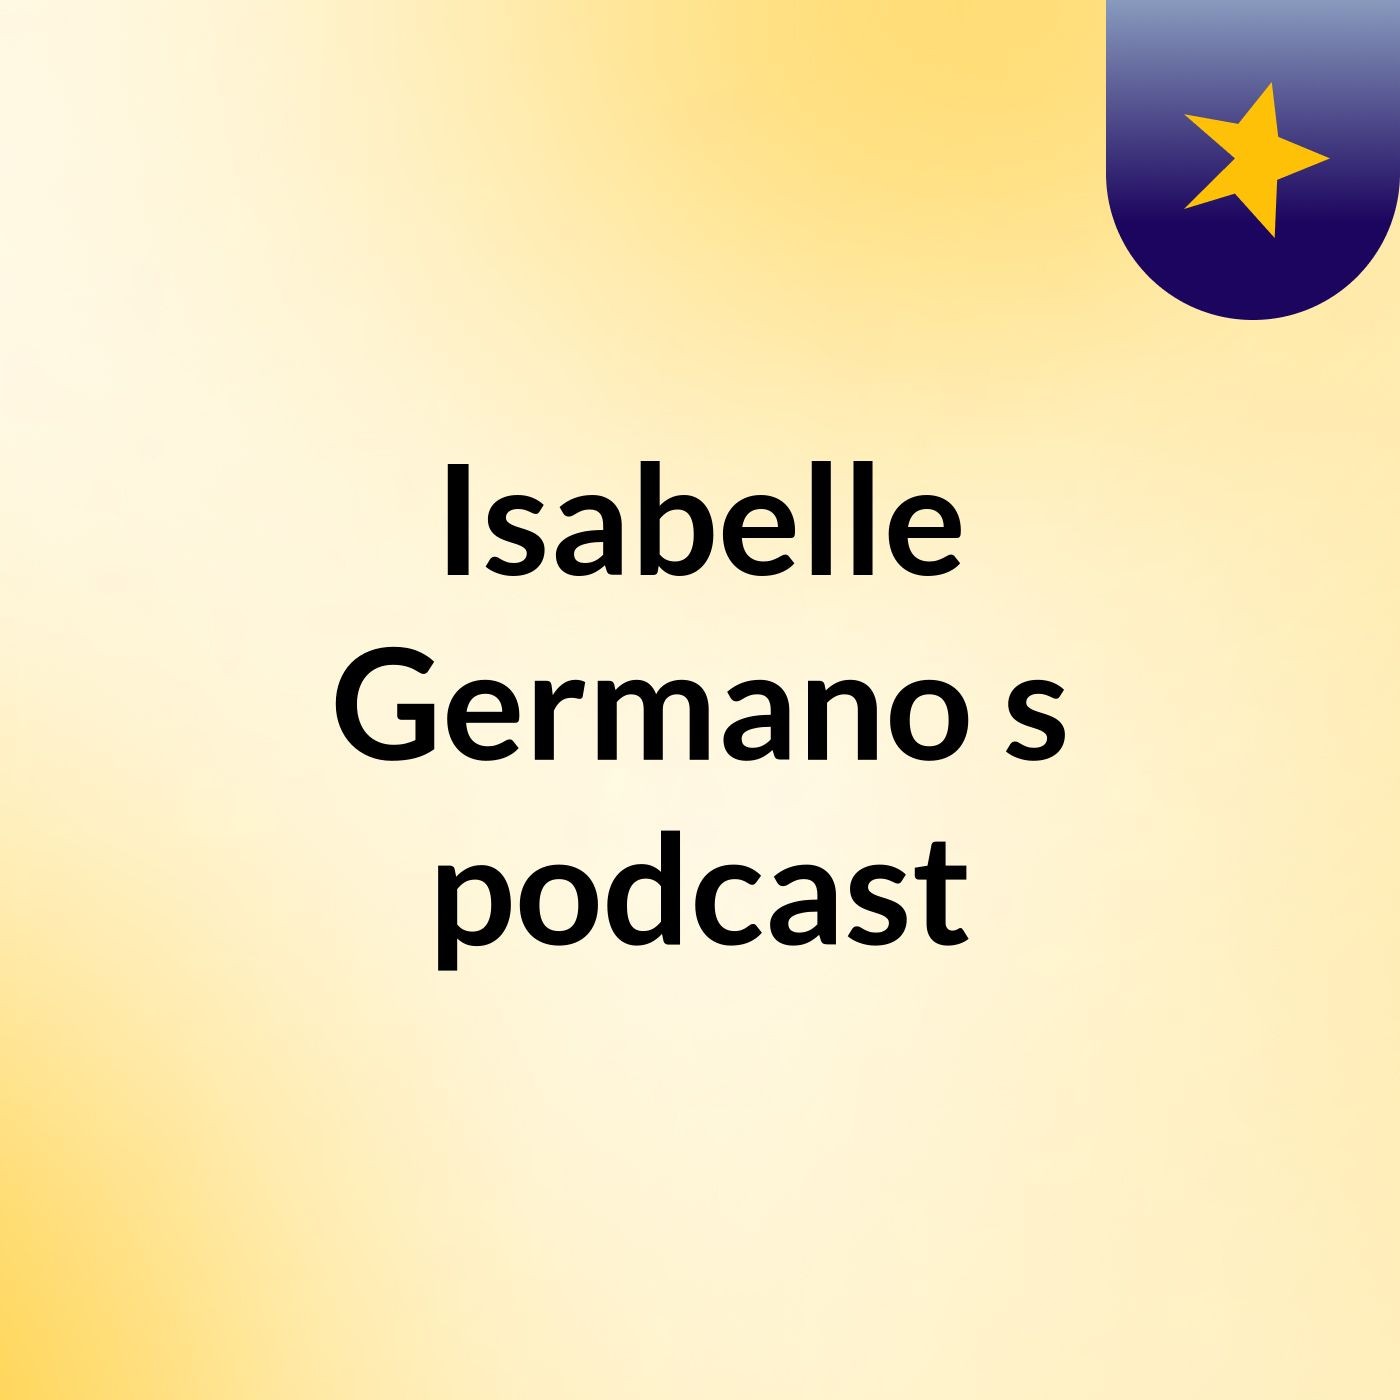 Isabelle Germano's podcast